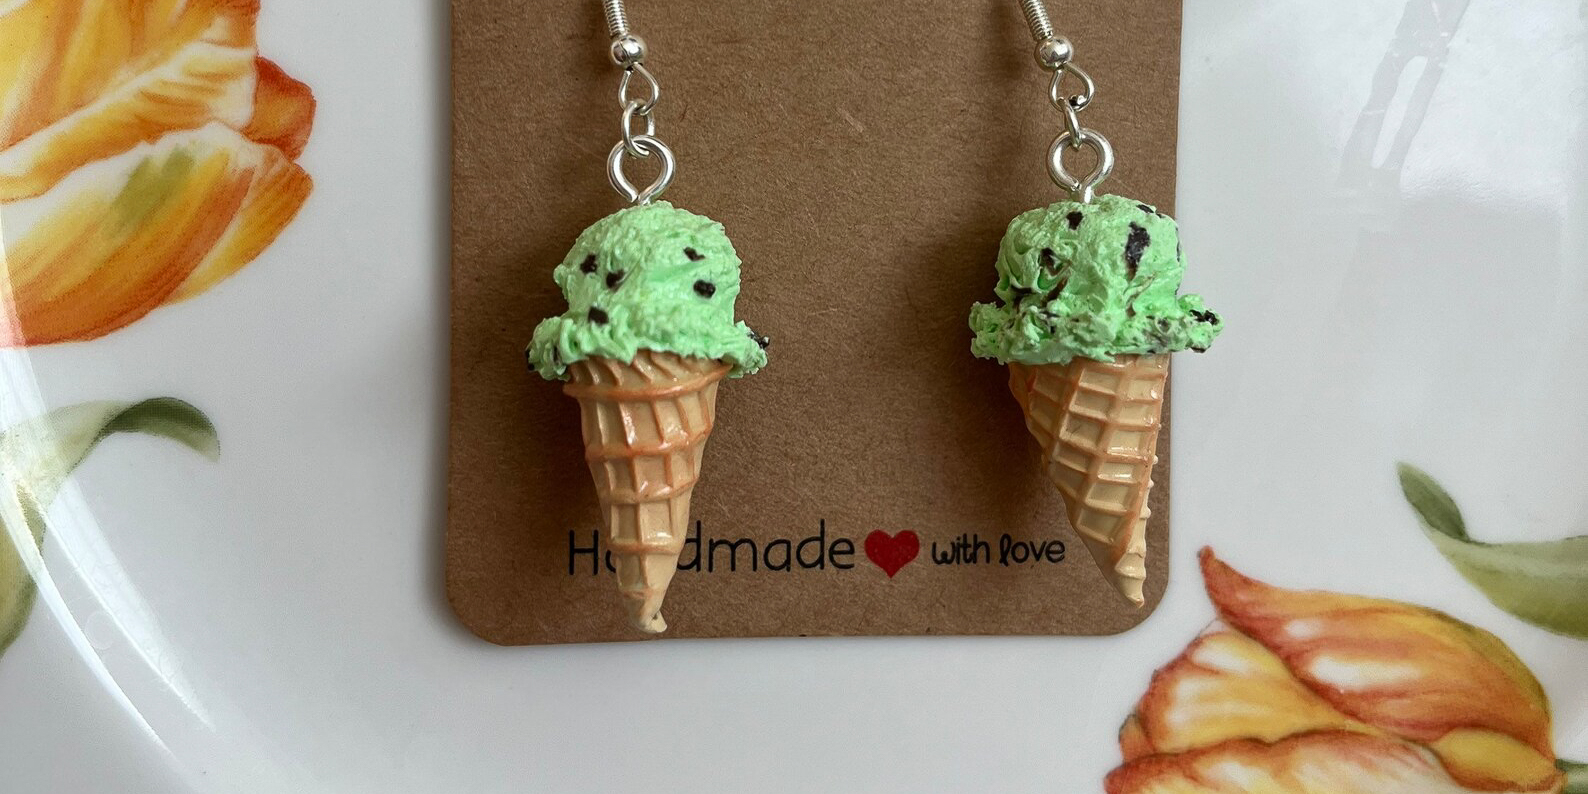 Mint chocolate chip ice cream earrings sold at Madeleine Ischos Etsy shop @FunSizedStudio. Photo courtesy of Madeleine Ischo.